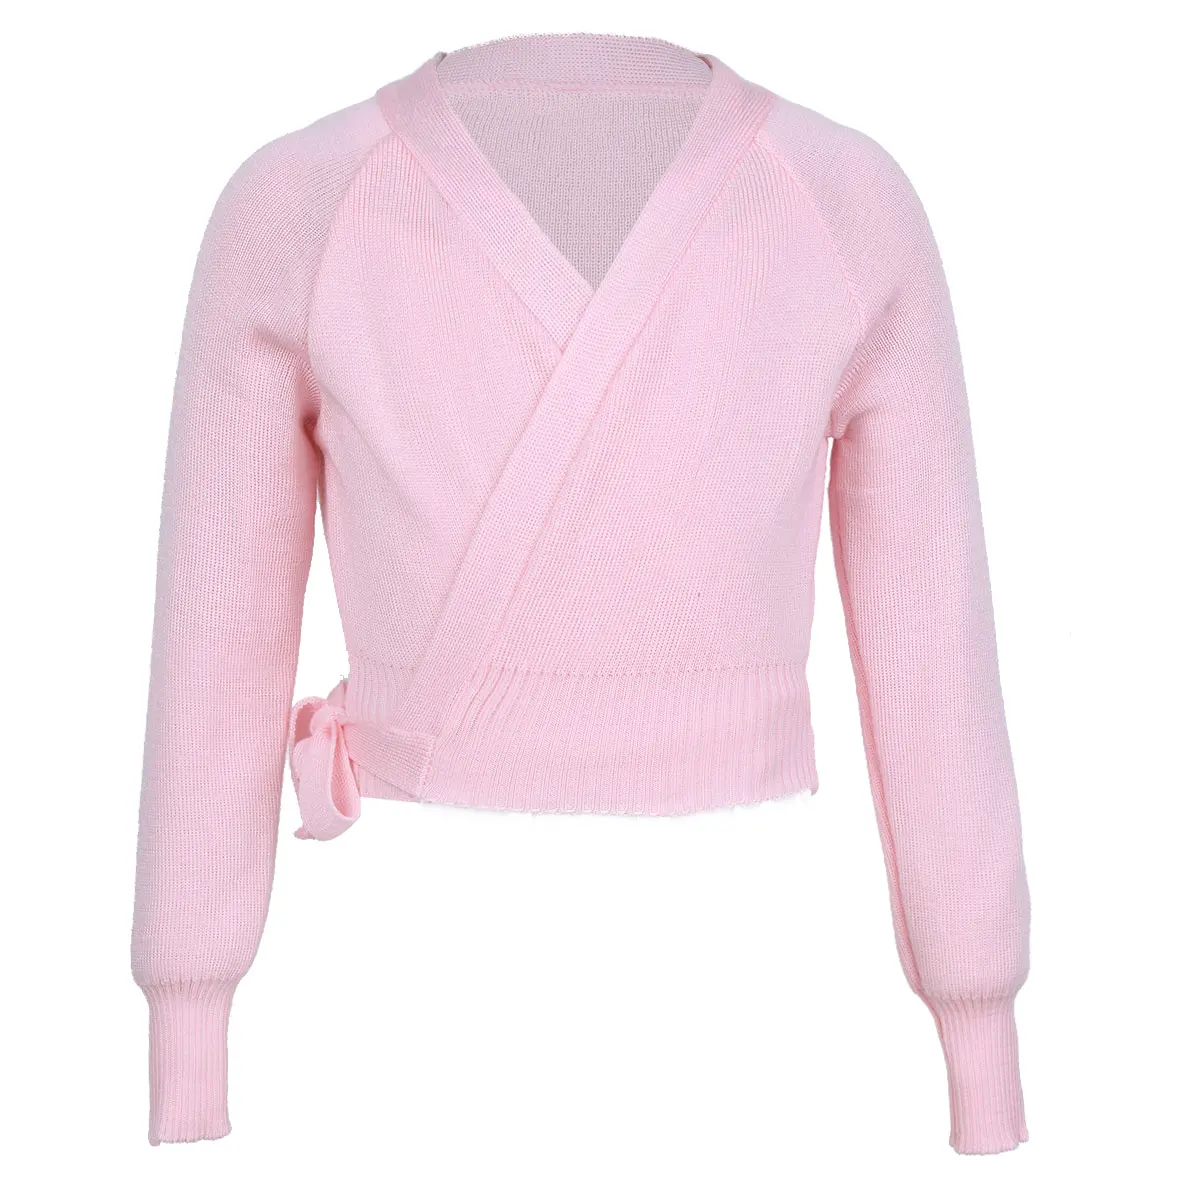 Aislor Kids Girls Wrap Knit Sweater Long Sleeves Ballet Dance Cover Up Gymnastic Jacket Cardigan 